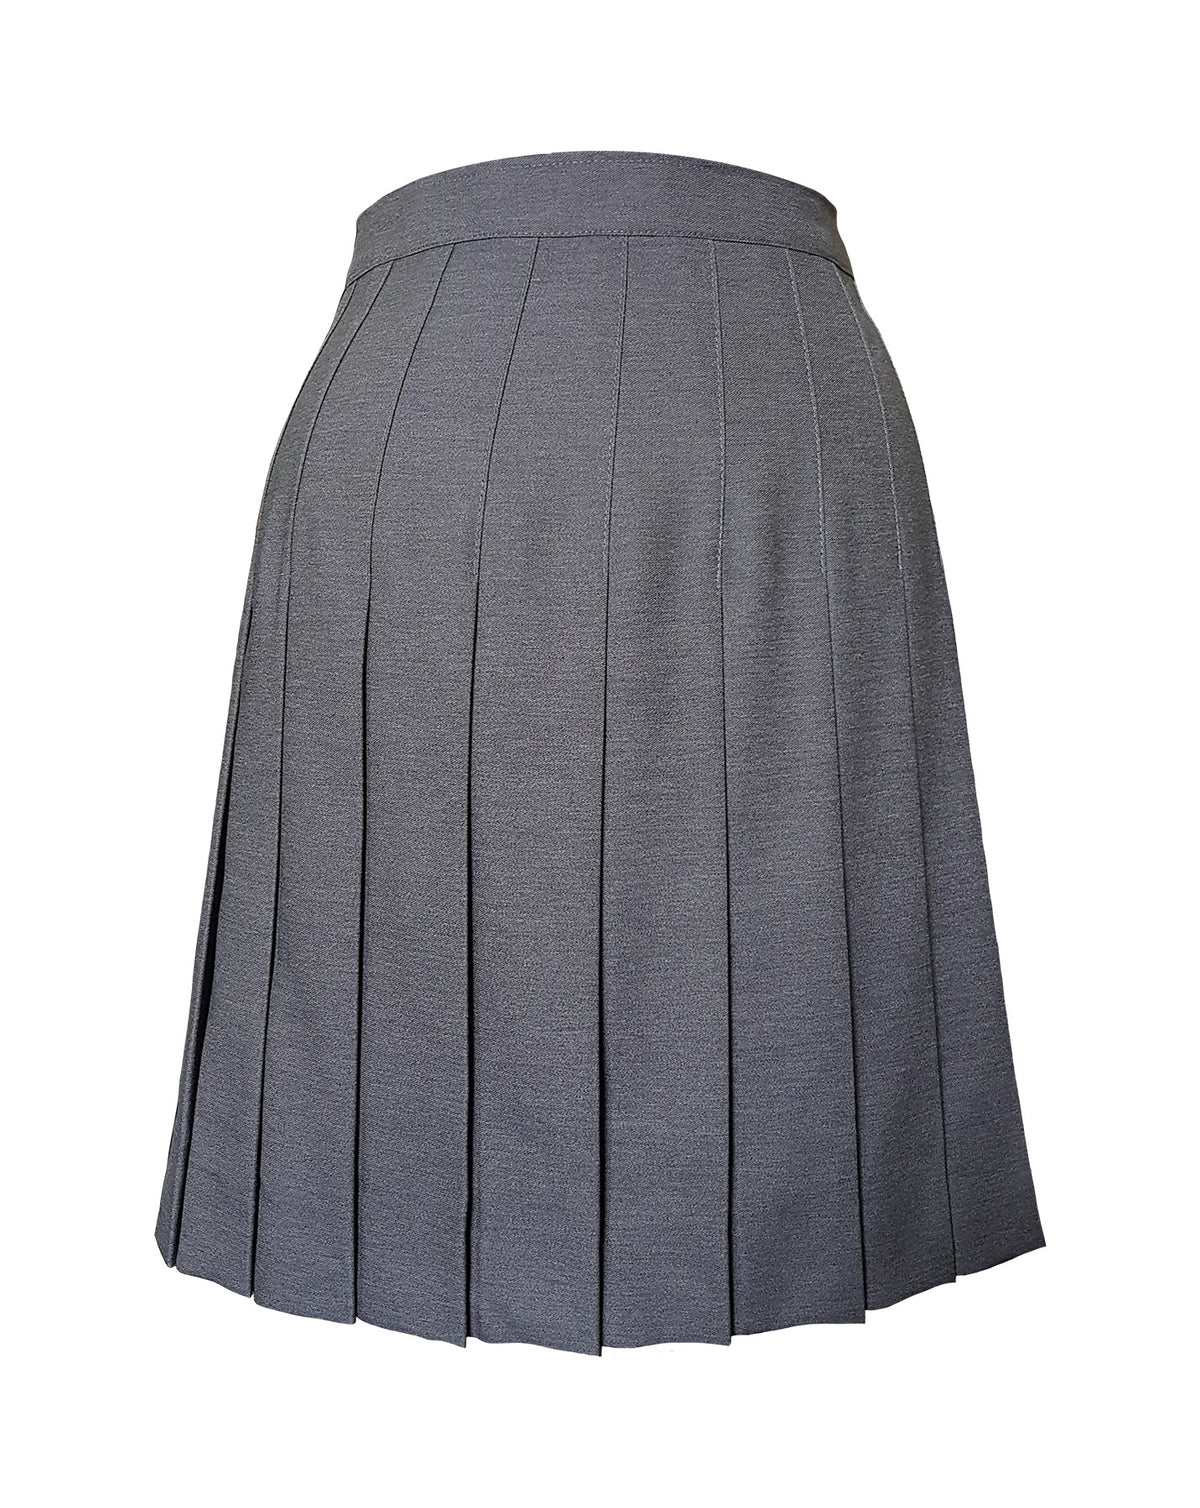 GREY CLASSIC WIDE FULL PLEAT SKIRT, REGULAR BACK, UP TO SIZE 29